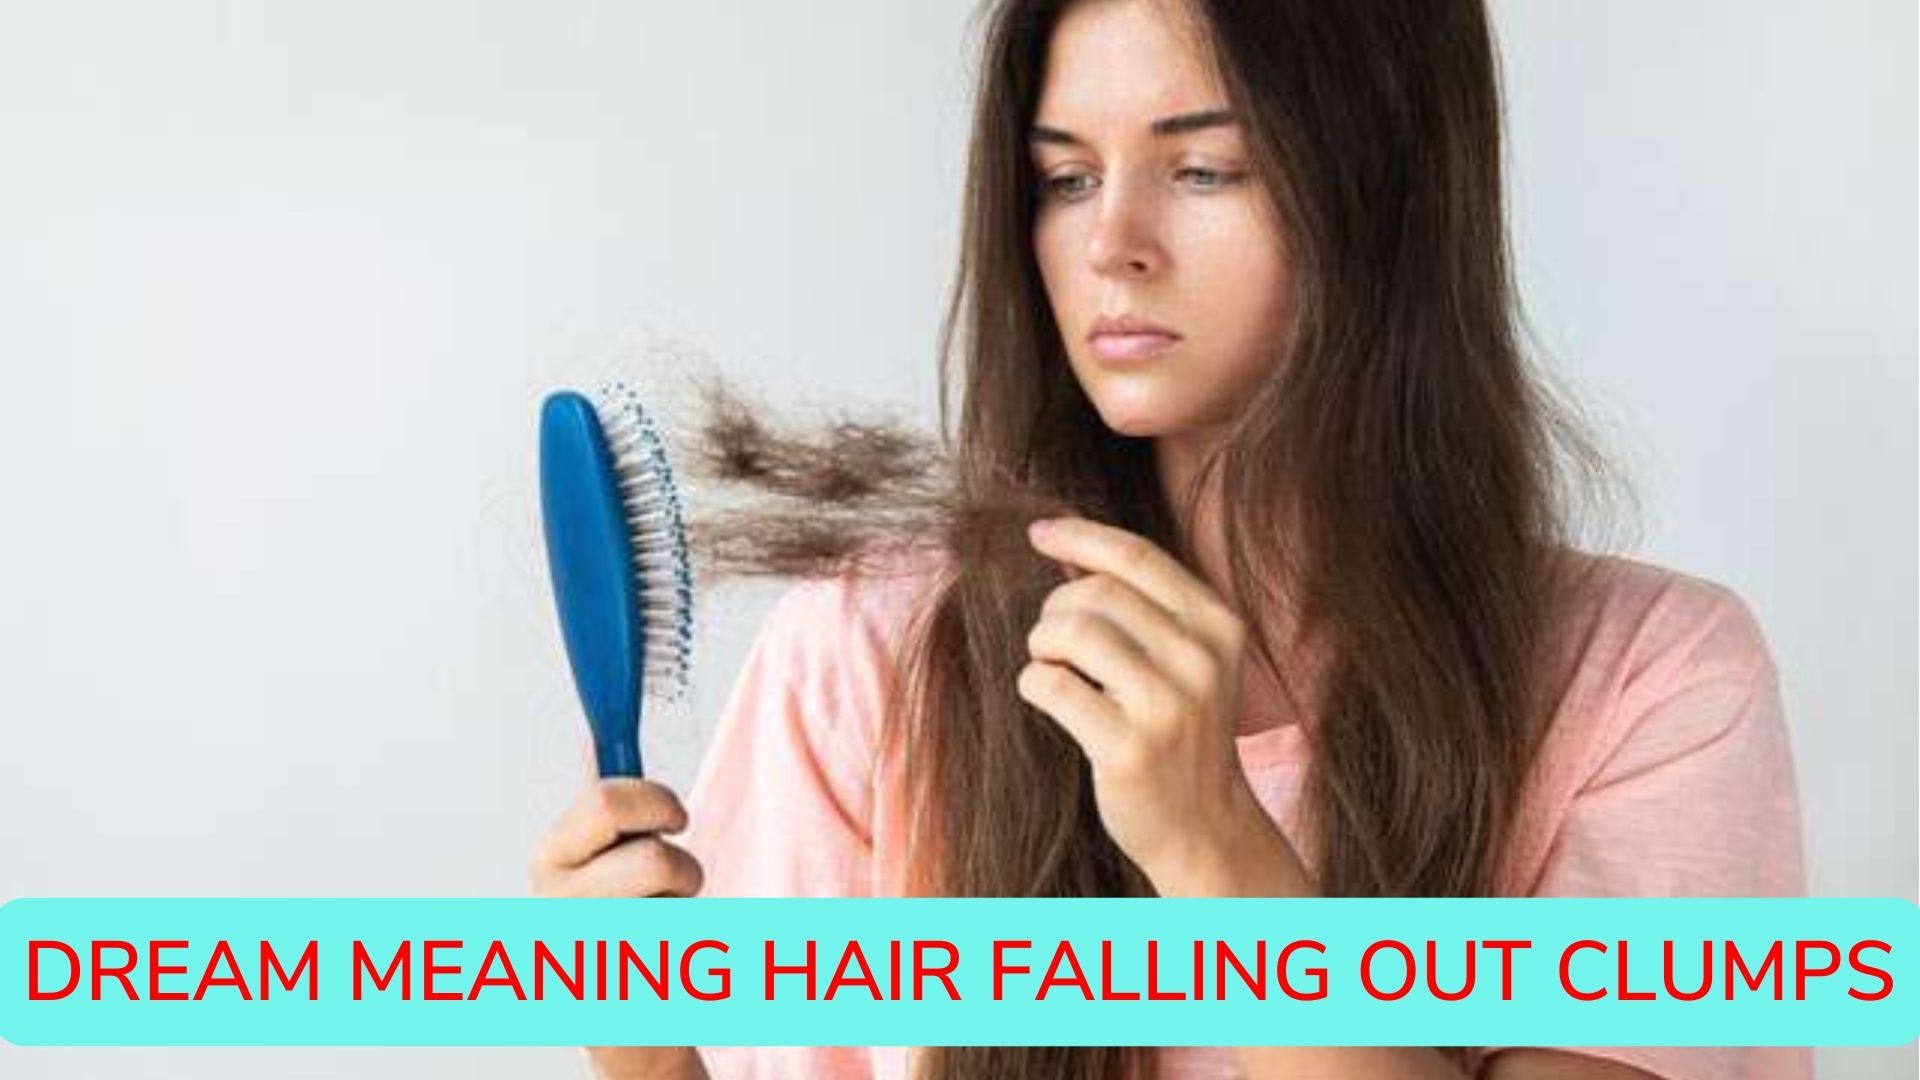 Dream Meaning Hair Falling Out Clumps - Lack Of Self-esteem